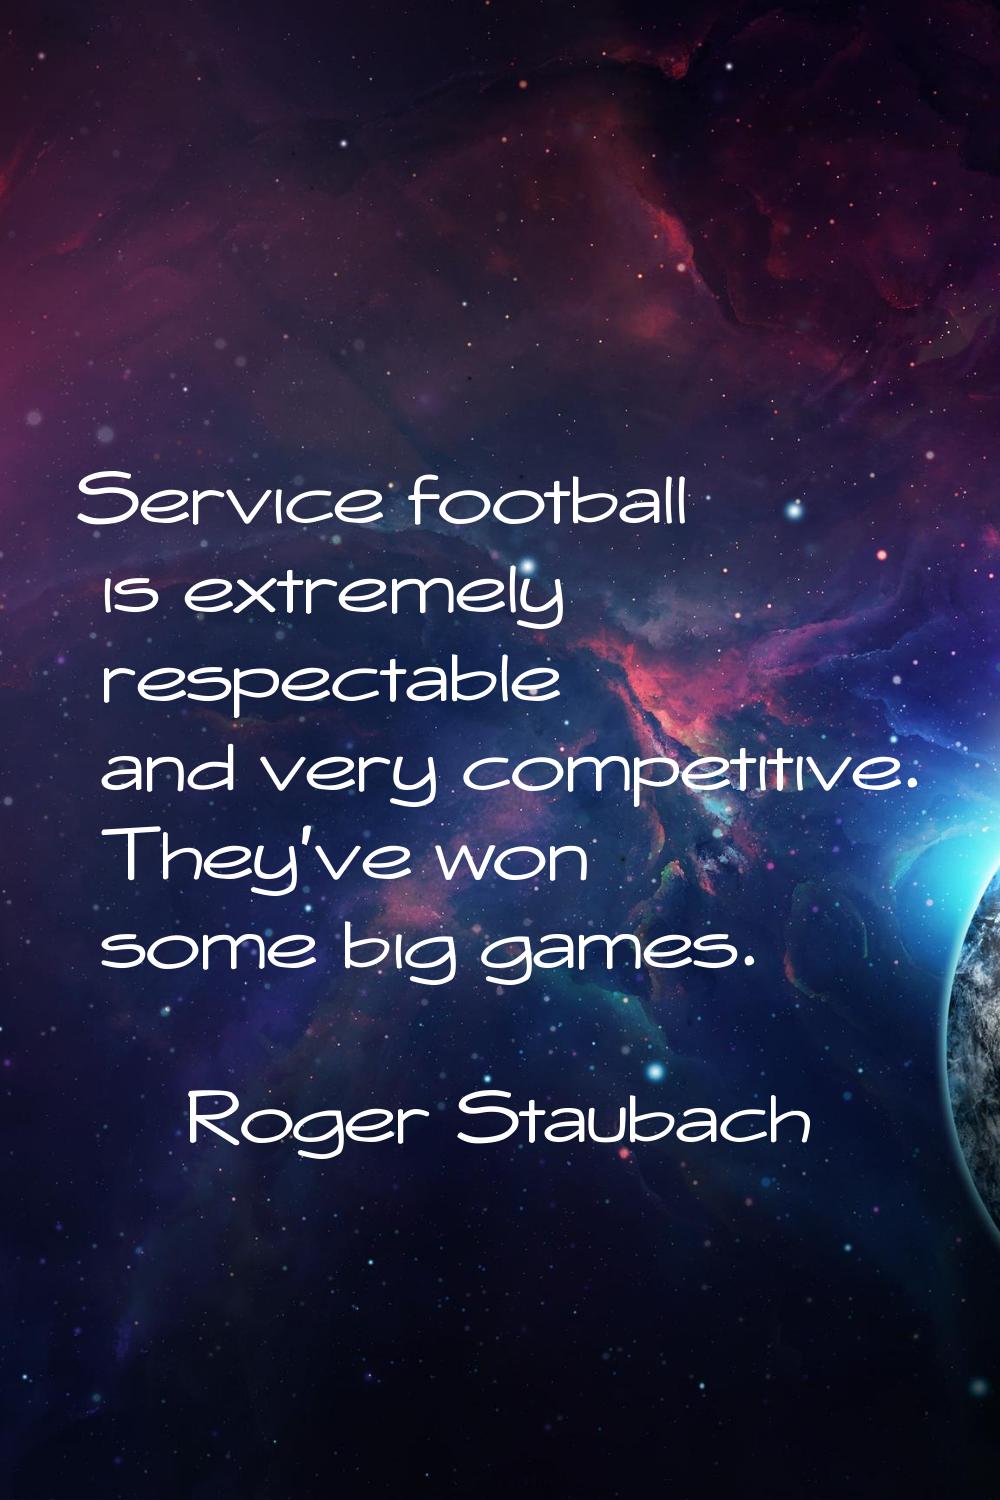 Service football is extremely respectable and very competitive. They've won some big games.